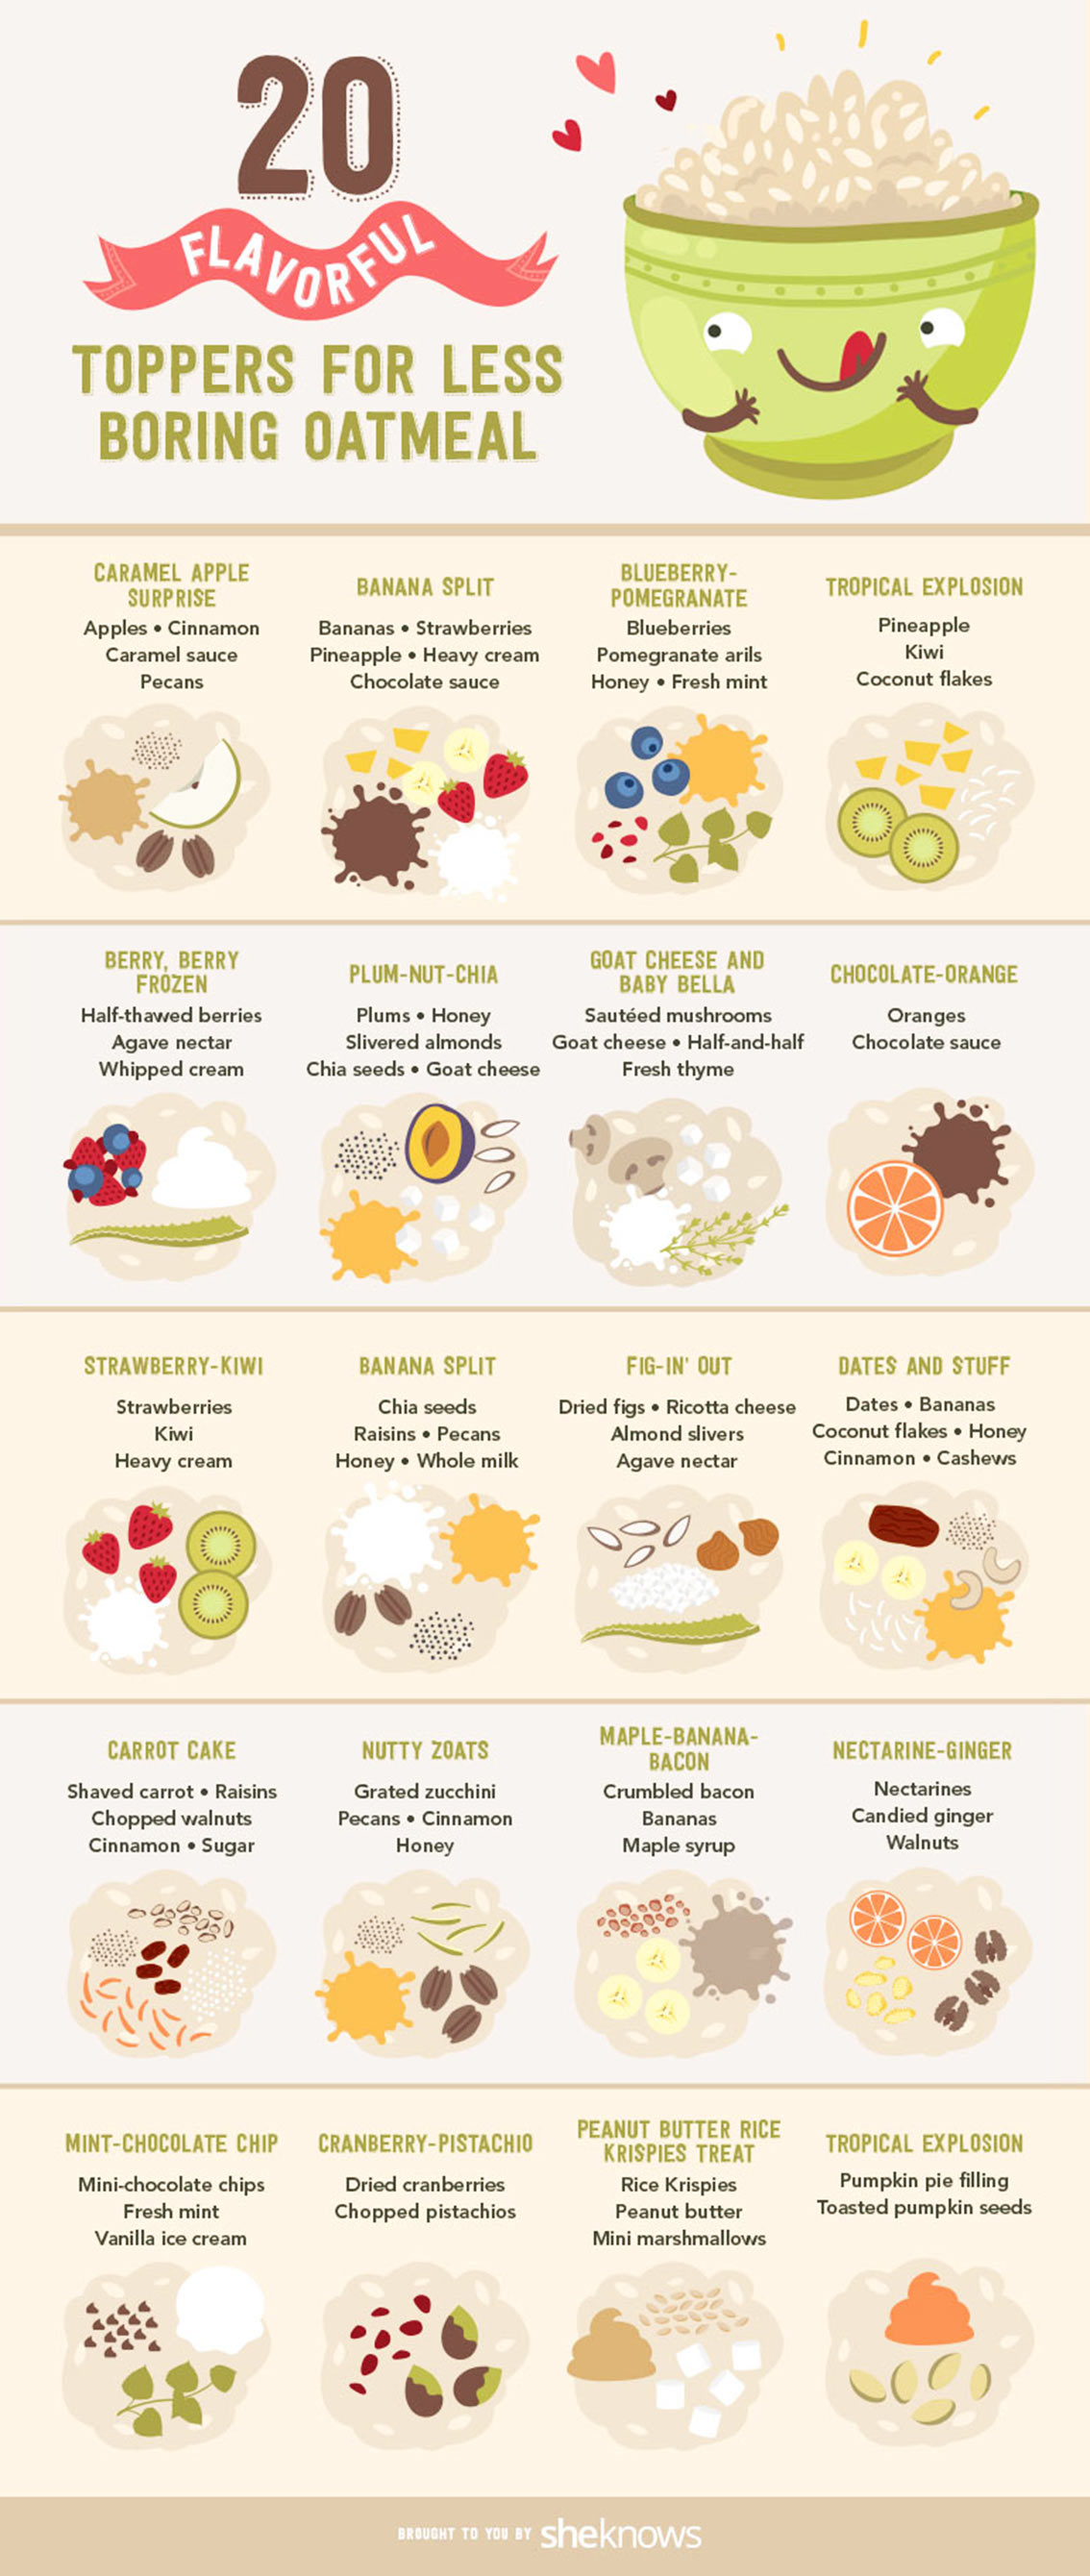 20 Best Toppings for Oatmeal Infographic